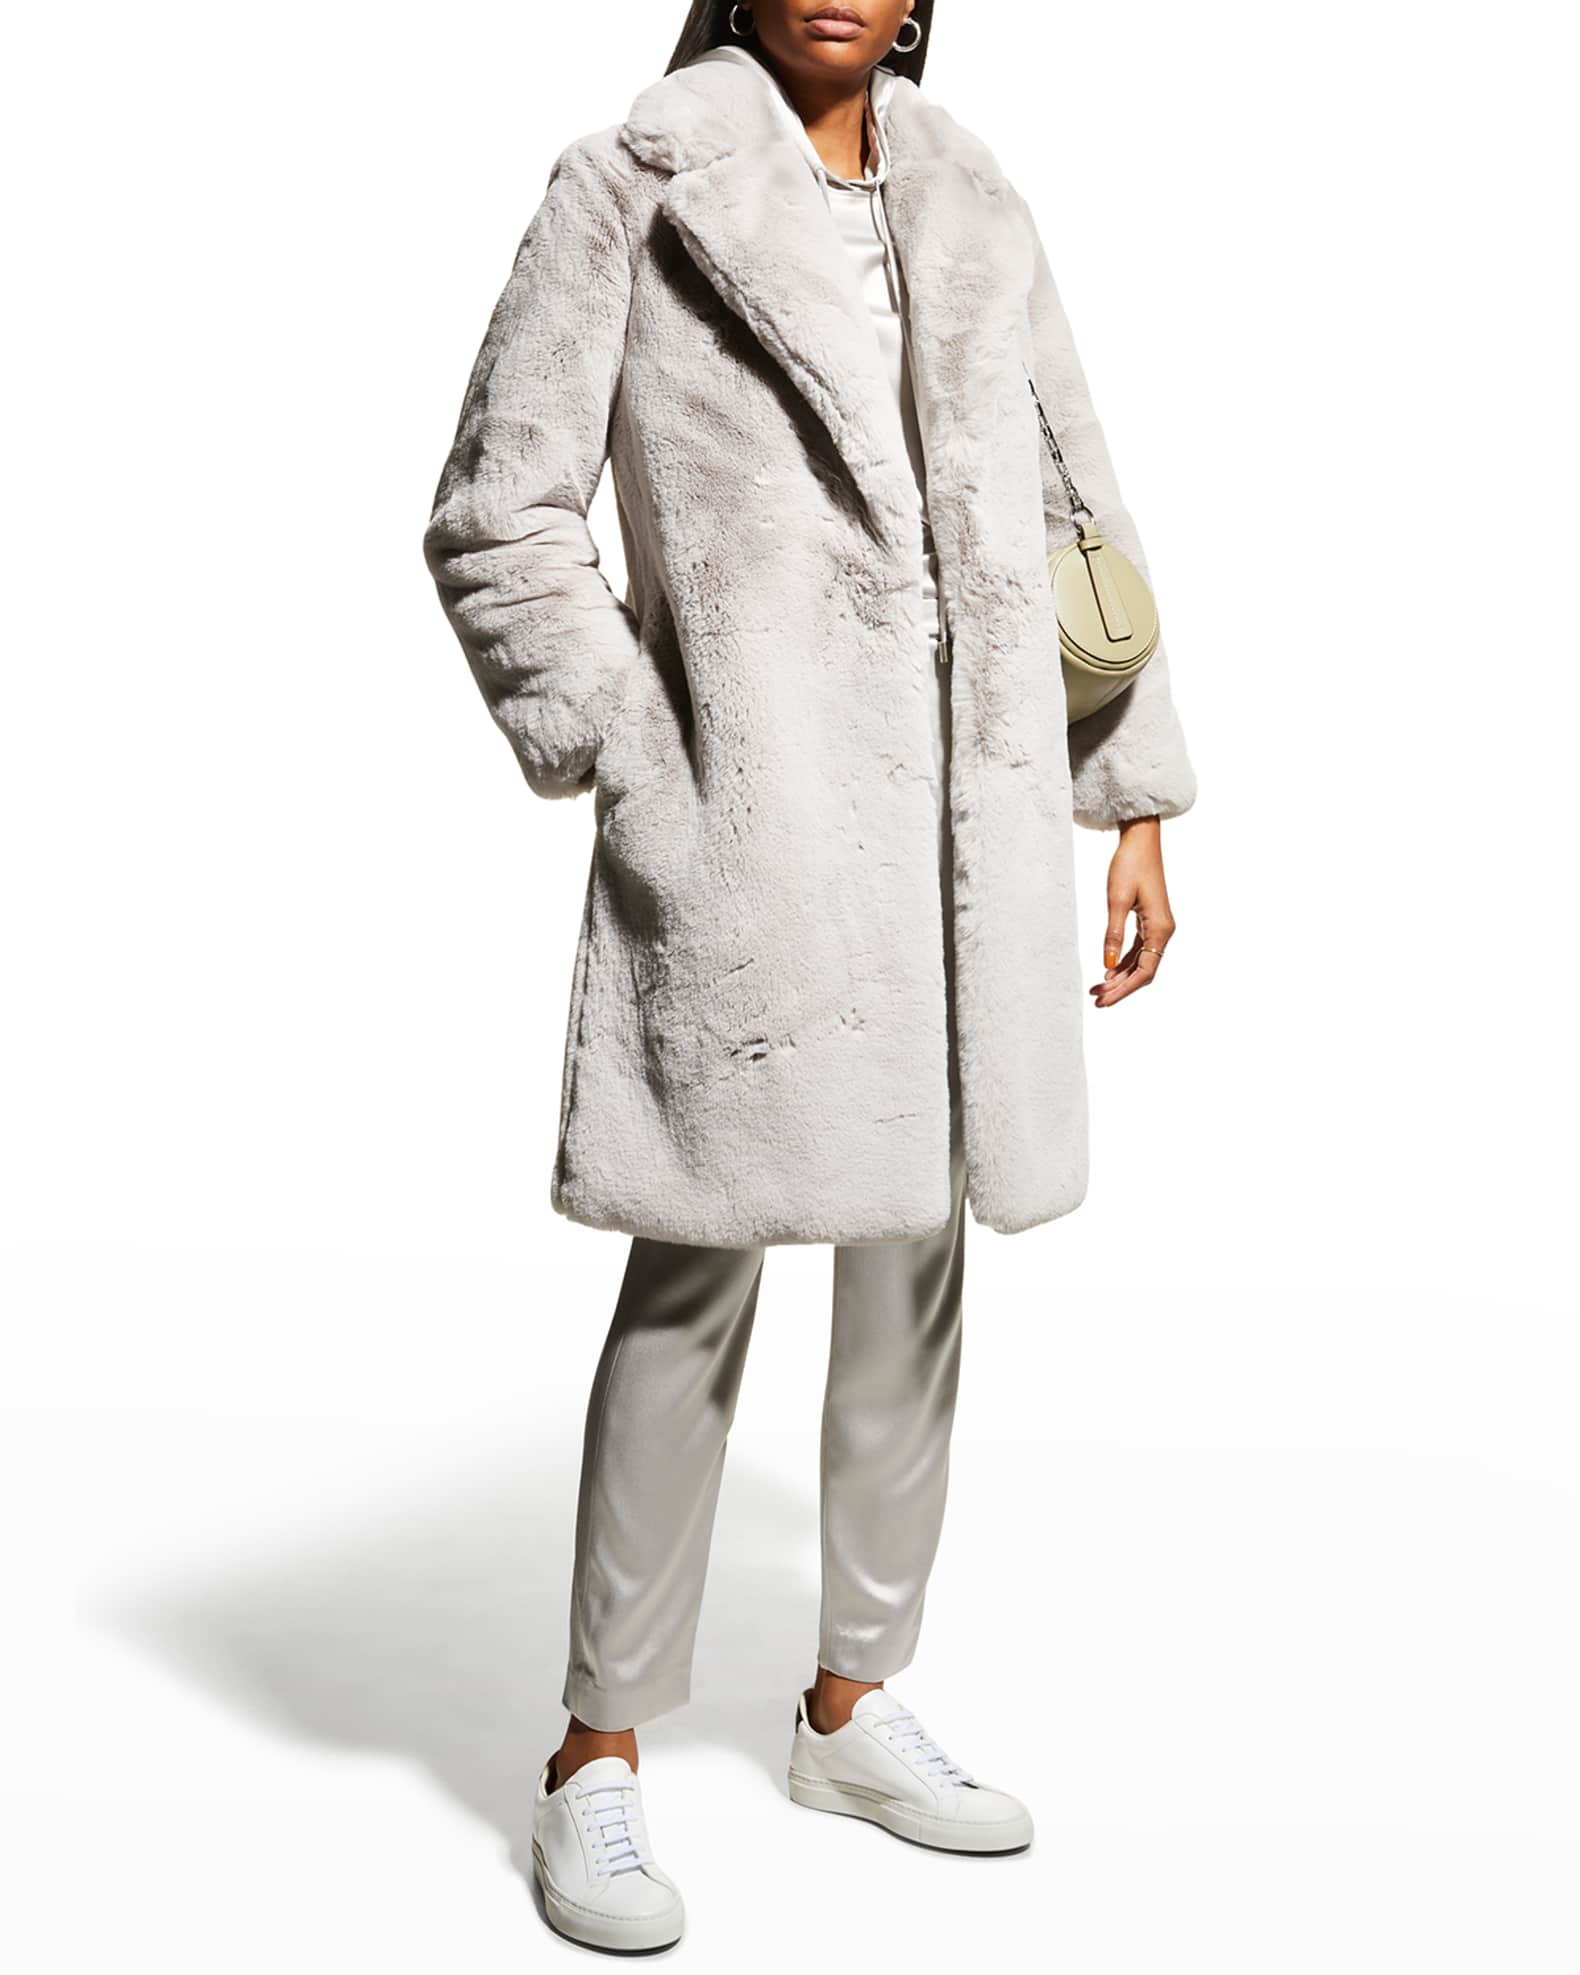 Milly Riley Faux Fur Coat | Neiman Marcus